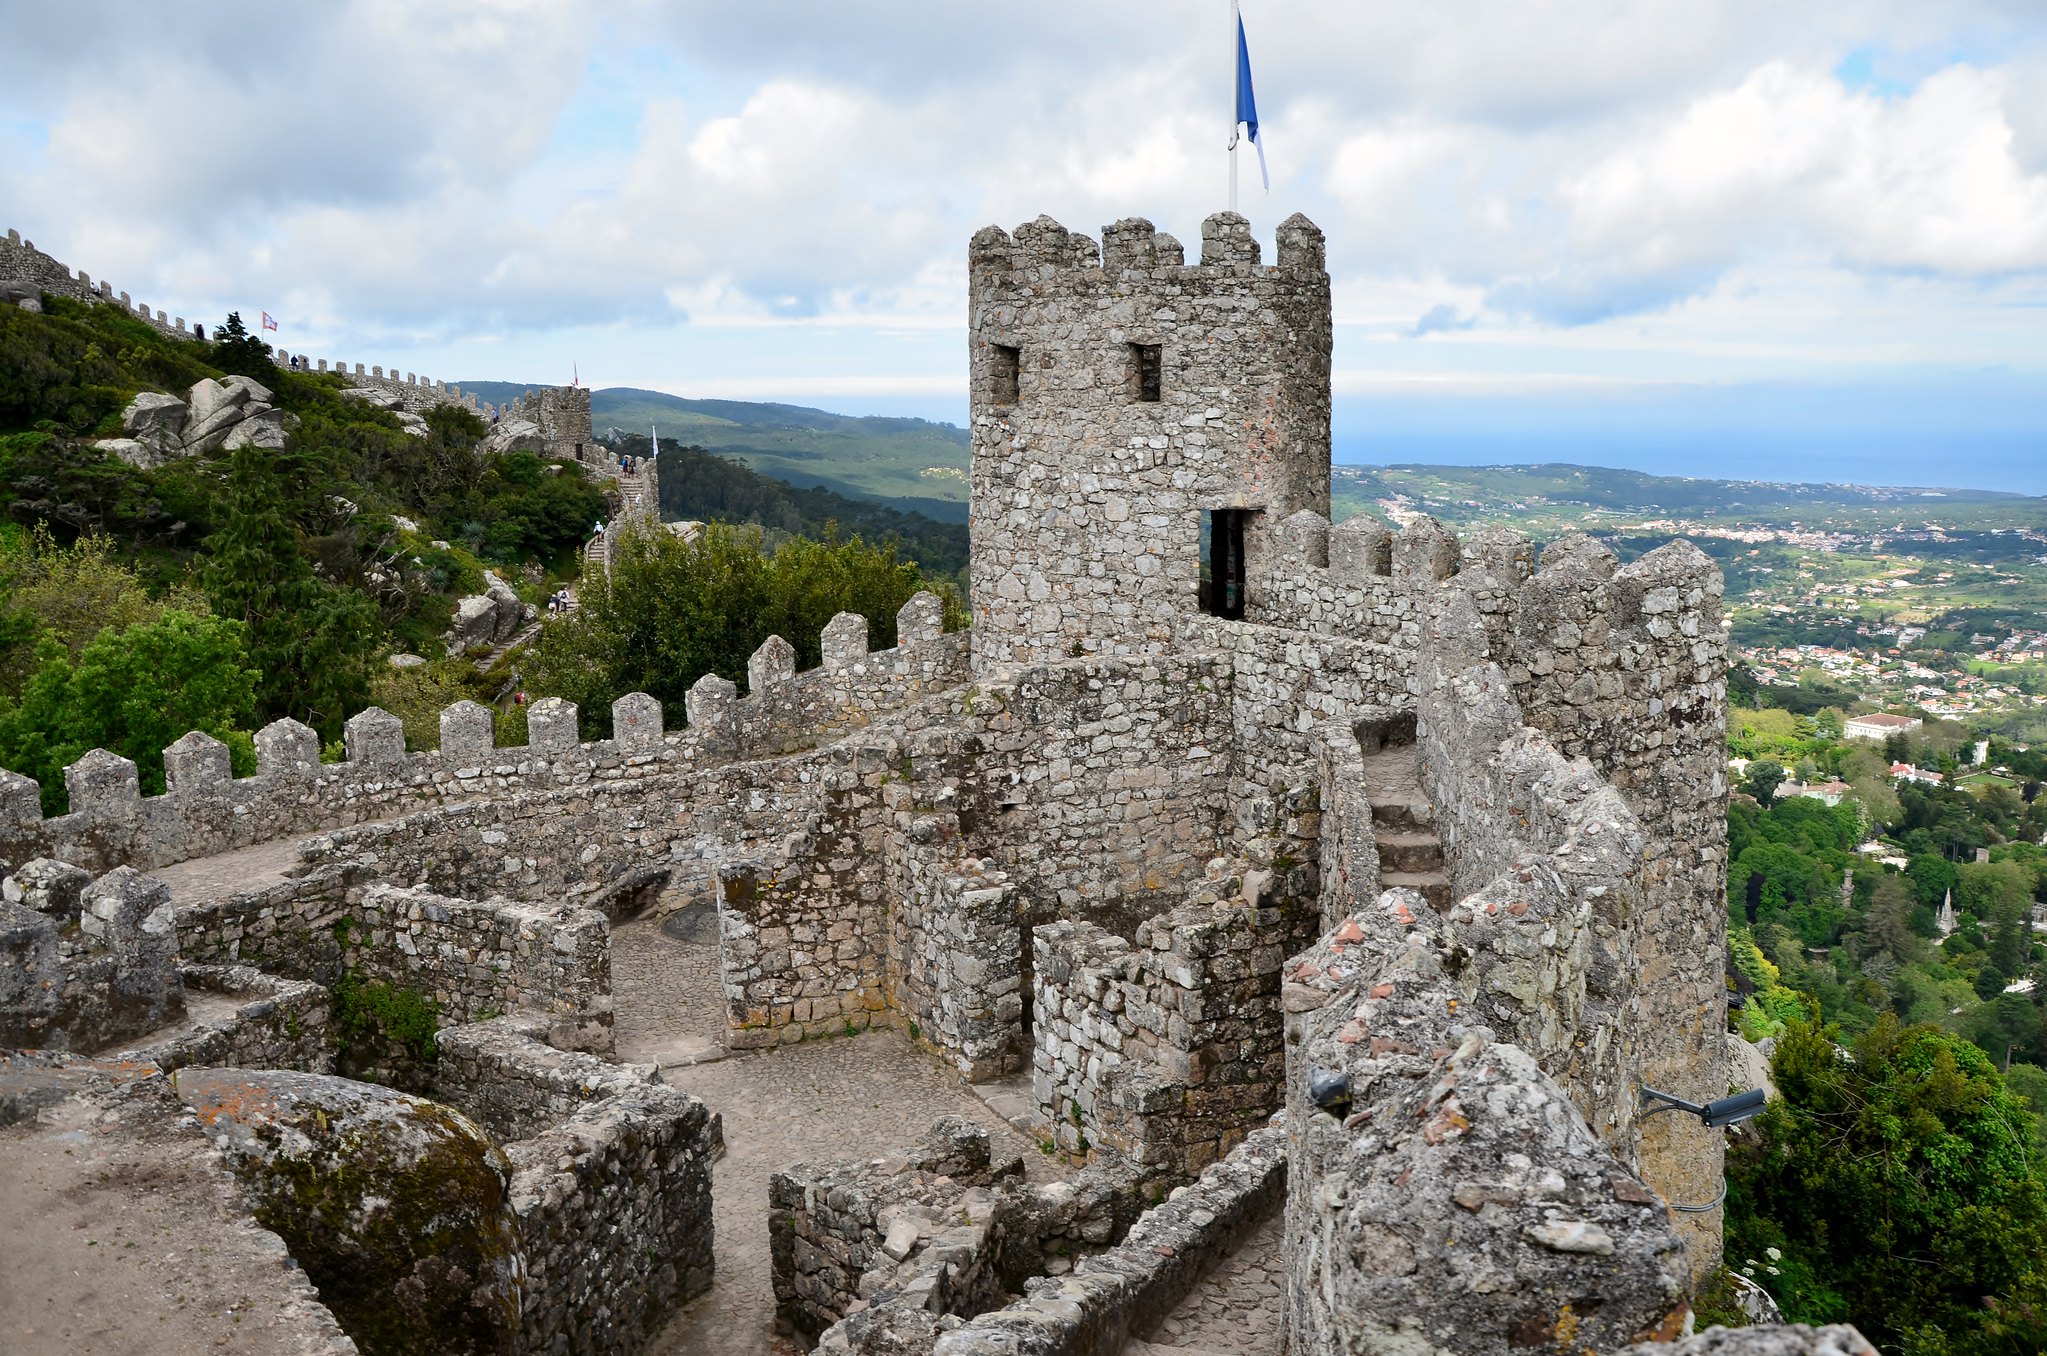 The+Ultimate+Self+Guided+Tour+of+Moorish+Castle%2C+Sintra%E2%80%99s+Oldest+World+Heritage+Site